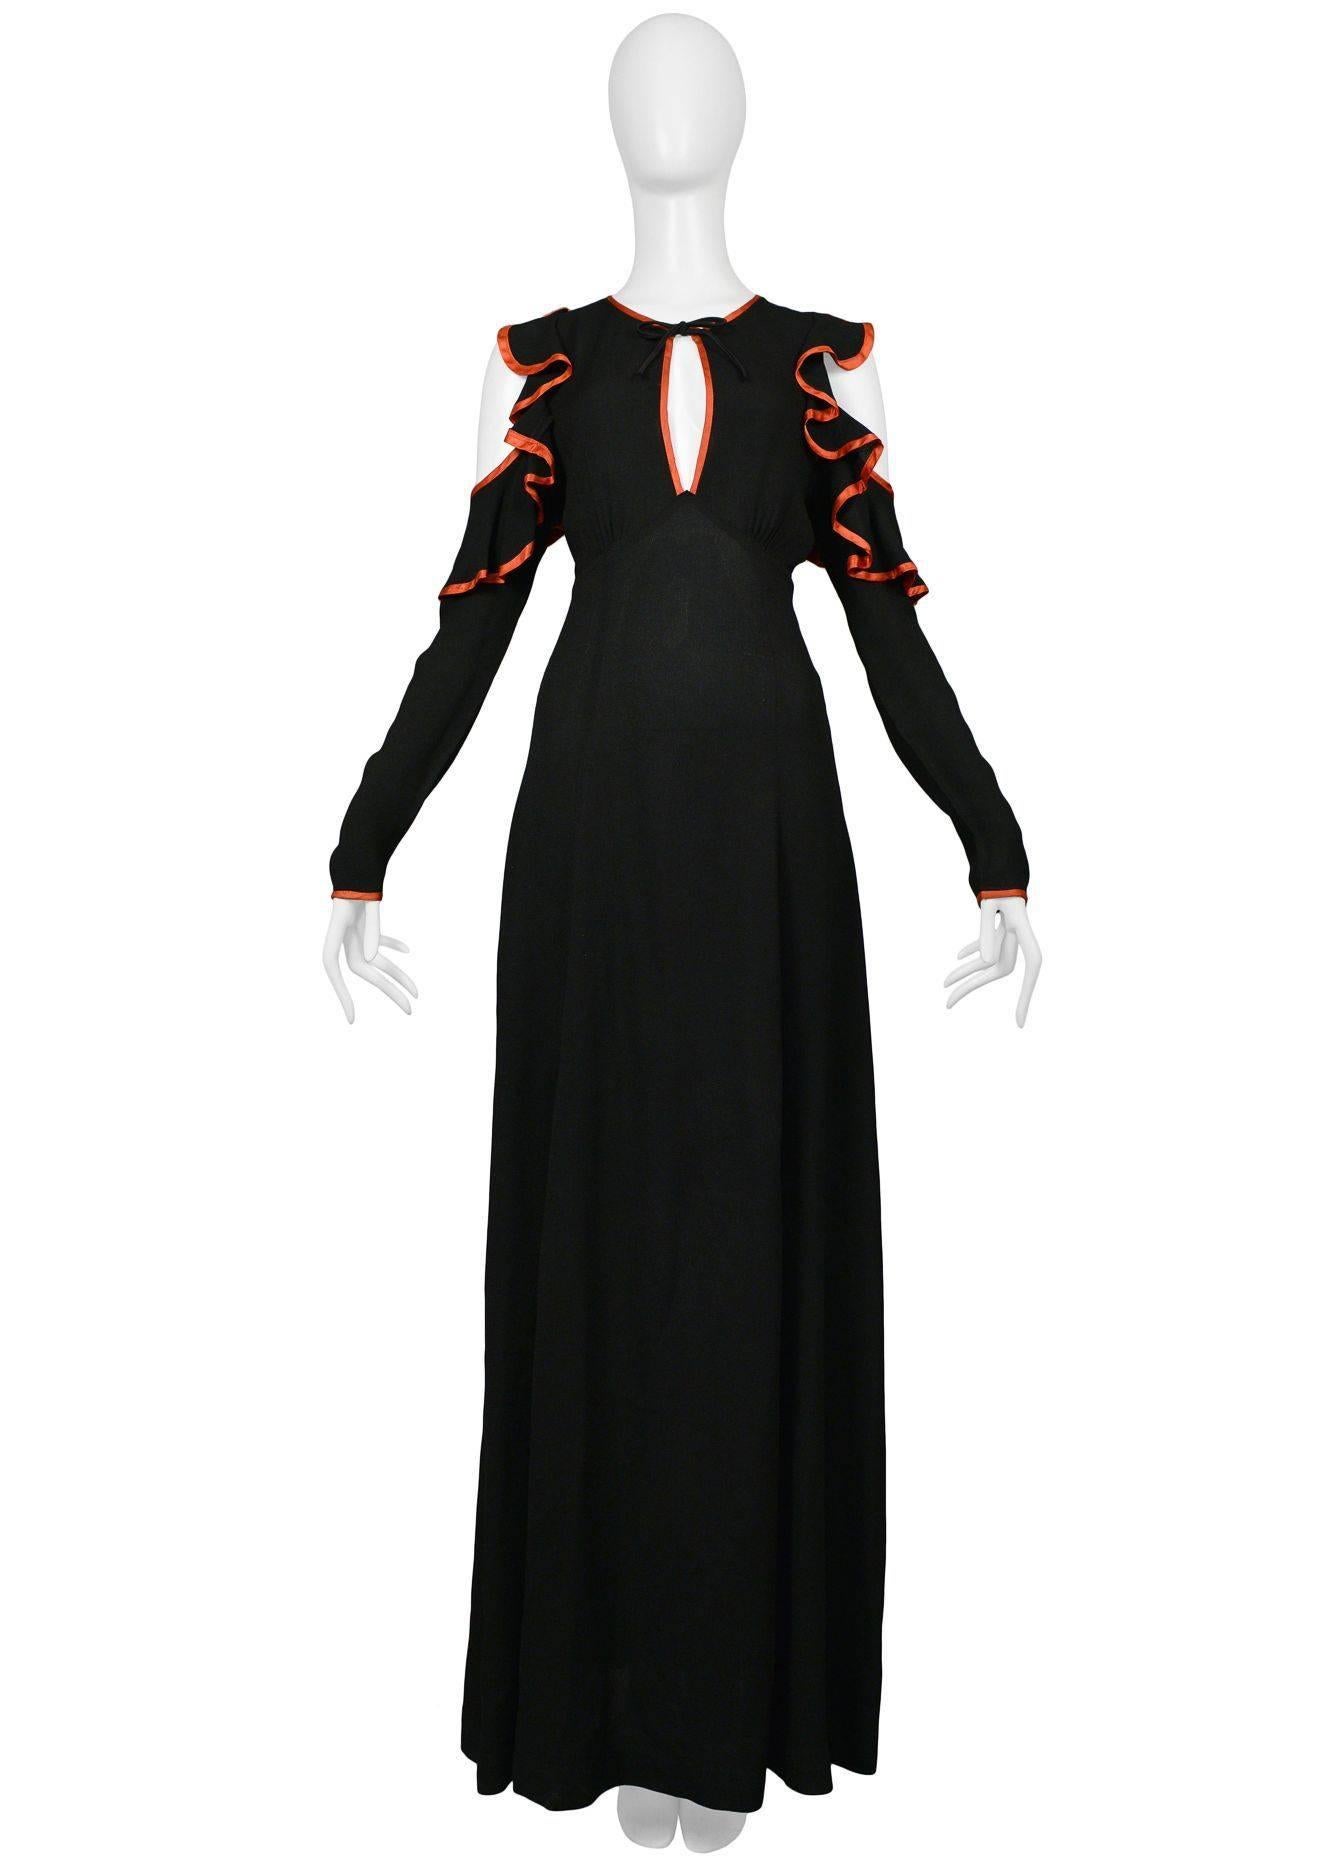 Iconic vintage Ossie Clark black crepe gown with open back, exposed shoulders, and red satin ribbon trim that ties at neck.